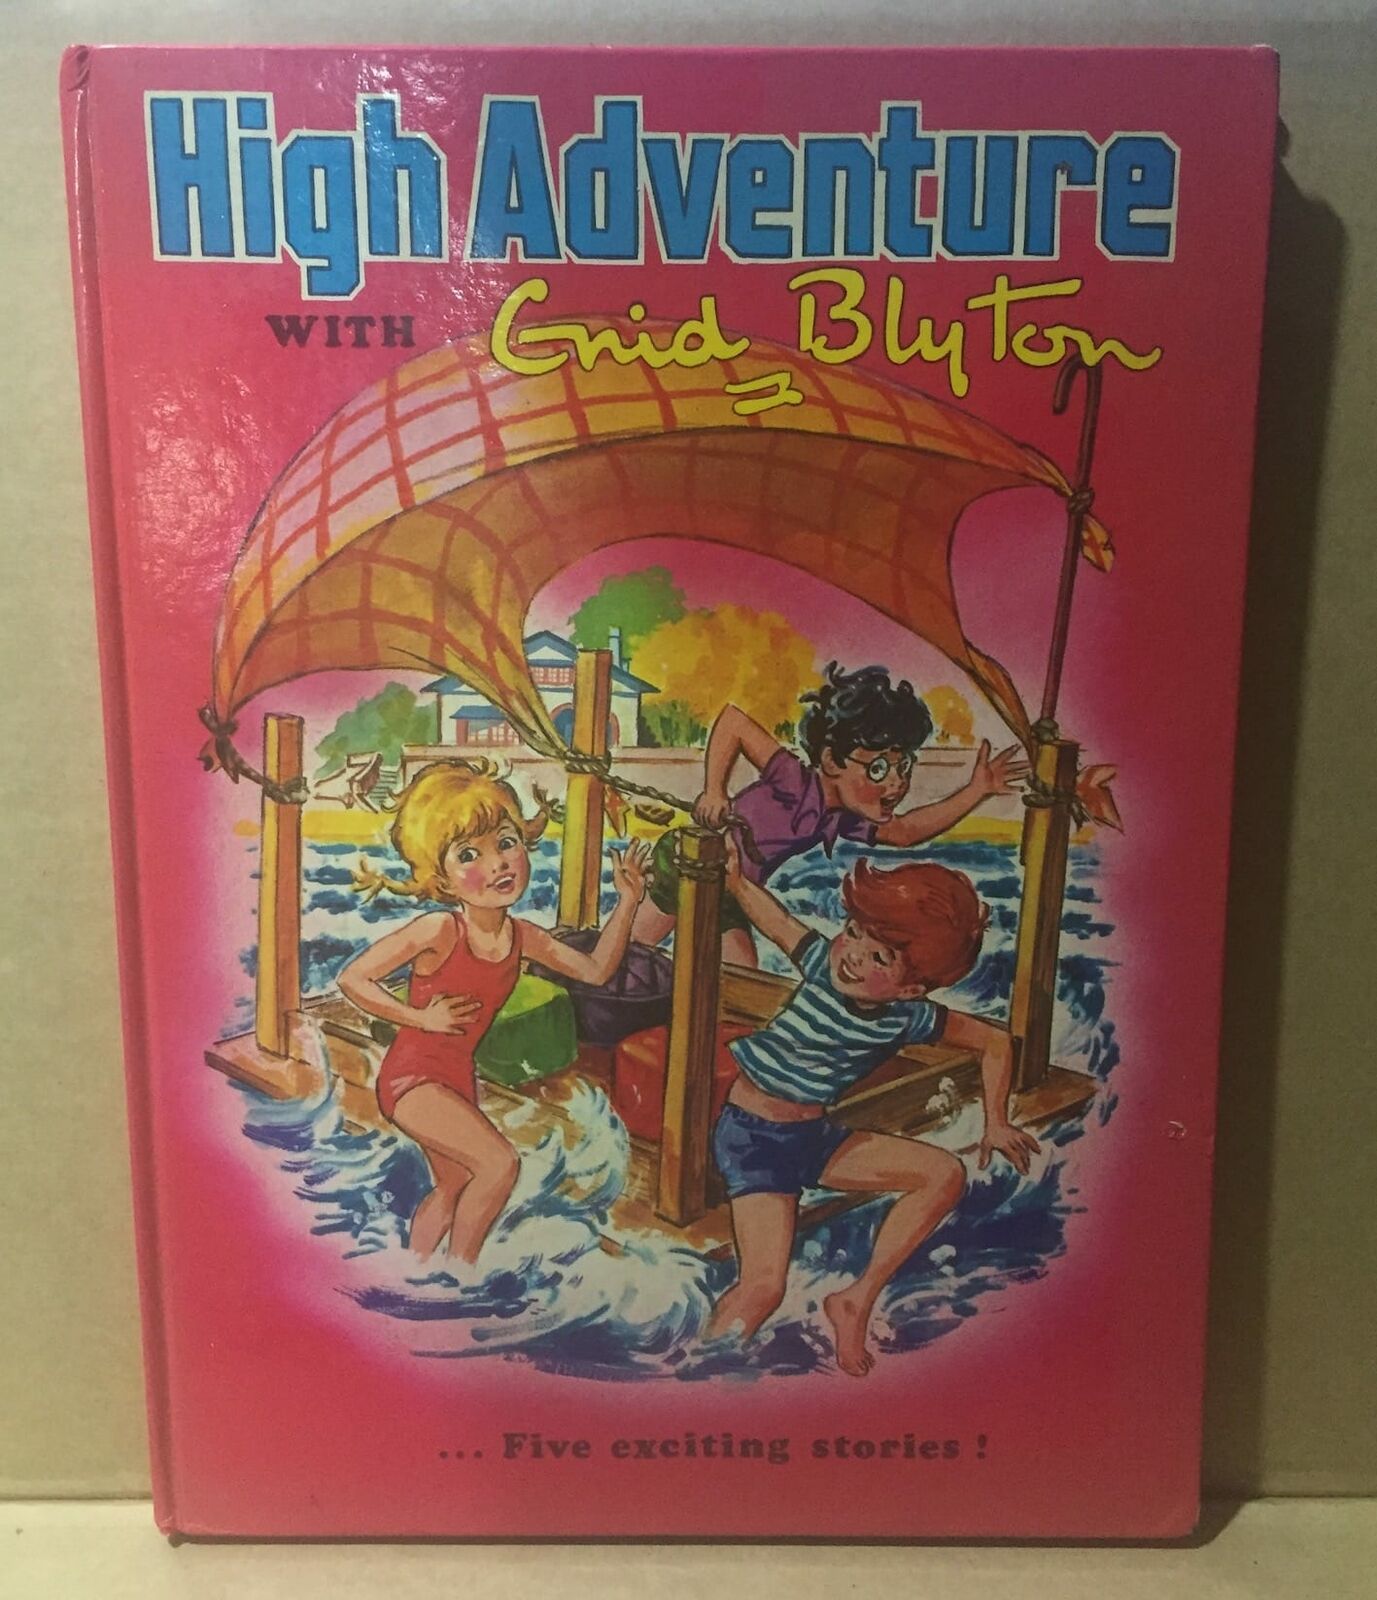 HARD COVER BOOK - HIGH ADVENTURE WITH ENID BLYTON